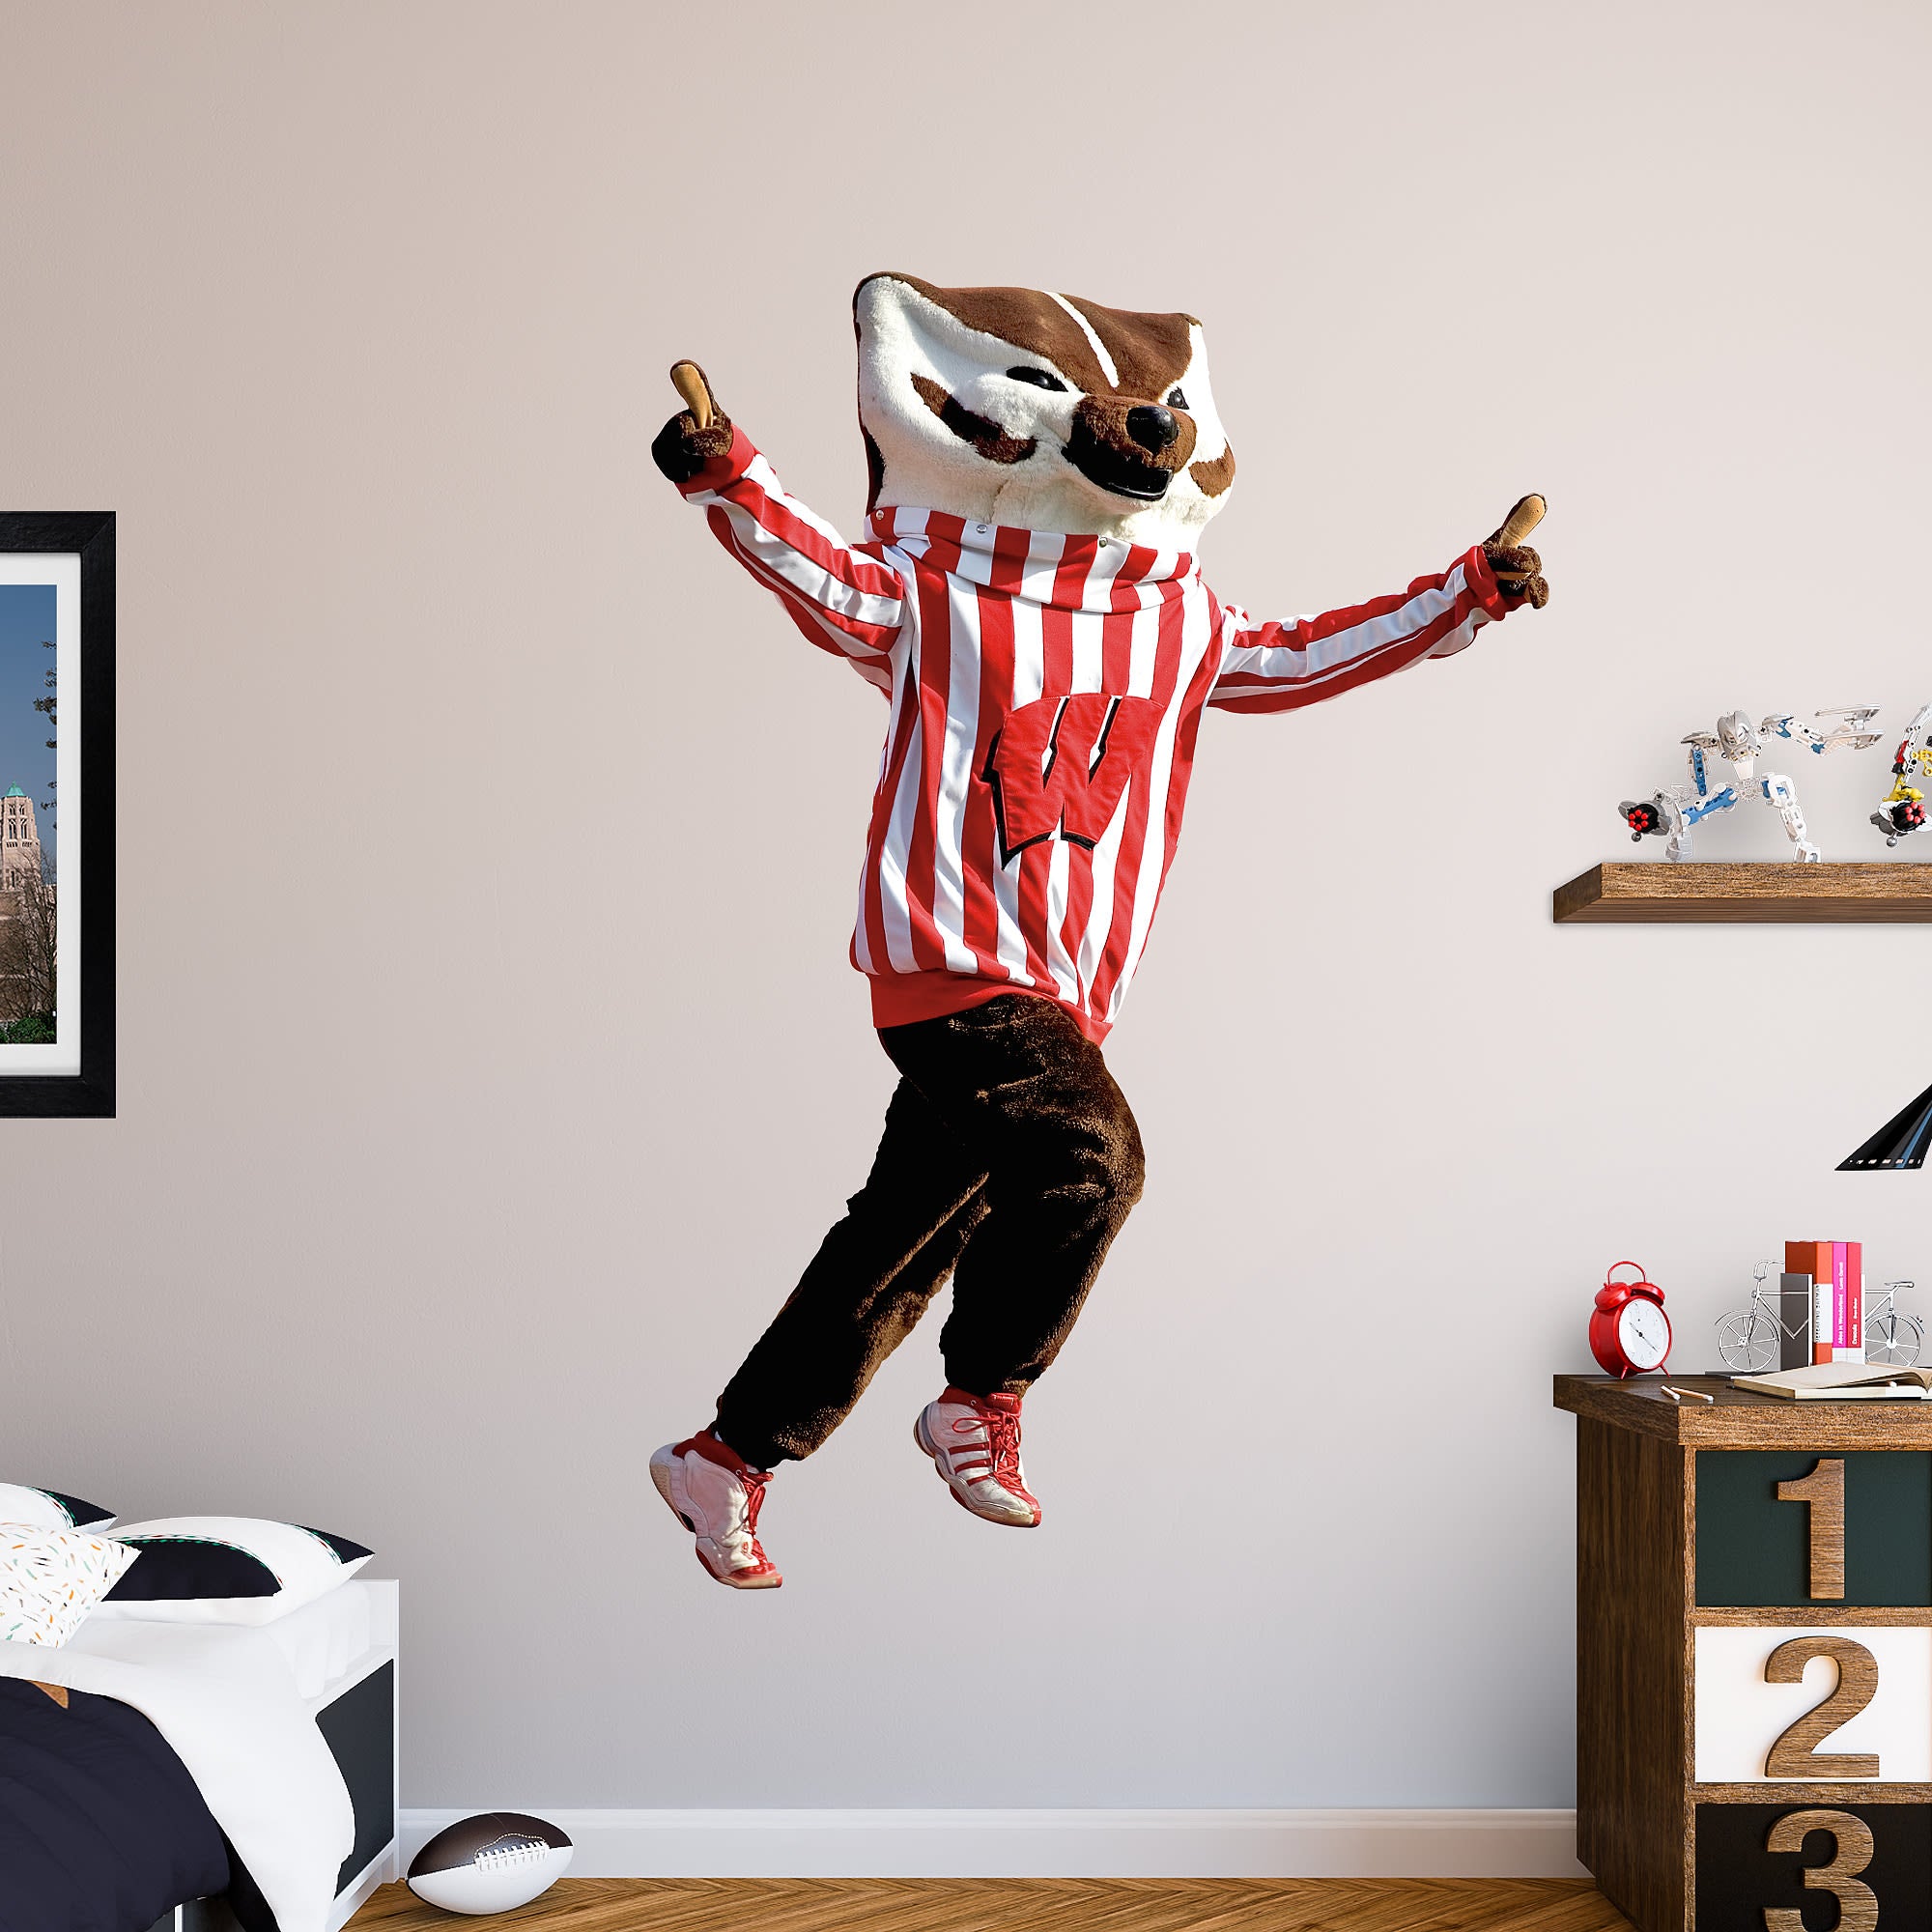 Wisconsin Badgers: Bucky Badger Mascot - Officially Licensed Removable Wall Decal 48.0"W x 71.0"H by Fathead | Vinyl